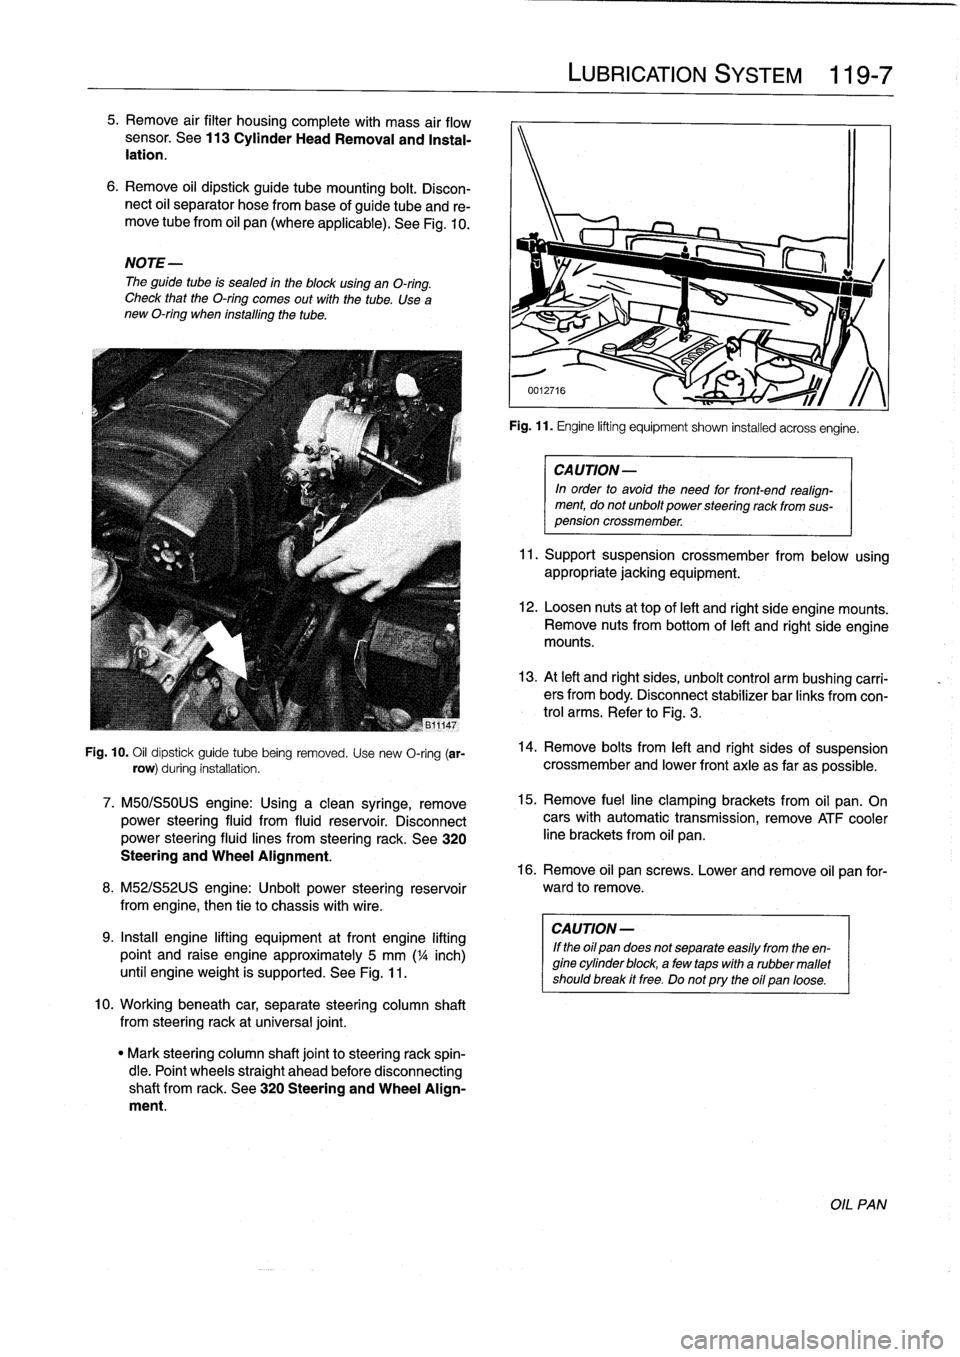 BMW 318i 1997 E36 Owners Manual 
5
.
Remove
air
filter
housingcomplete
with
mass
air
flow
sensor
.
See113
Cylinder
HeadRemoval
and
Instal-
lation
.

6
.
Remove
oil
dipstick
guide
tube
mounting
bolt
.
Discon-
nect
oil
separator
hose
